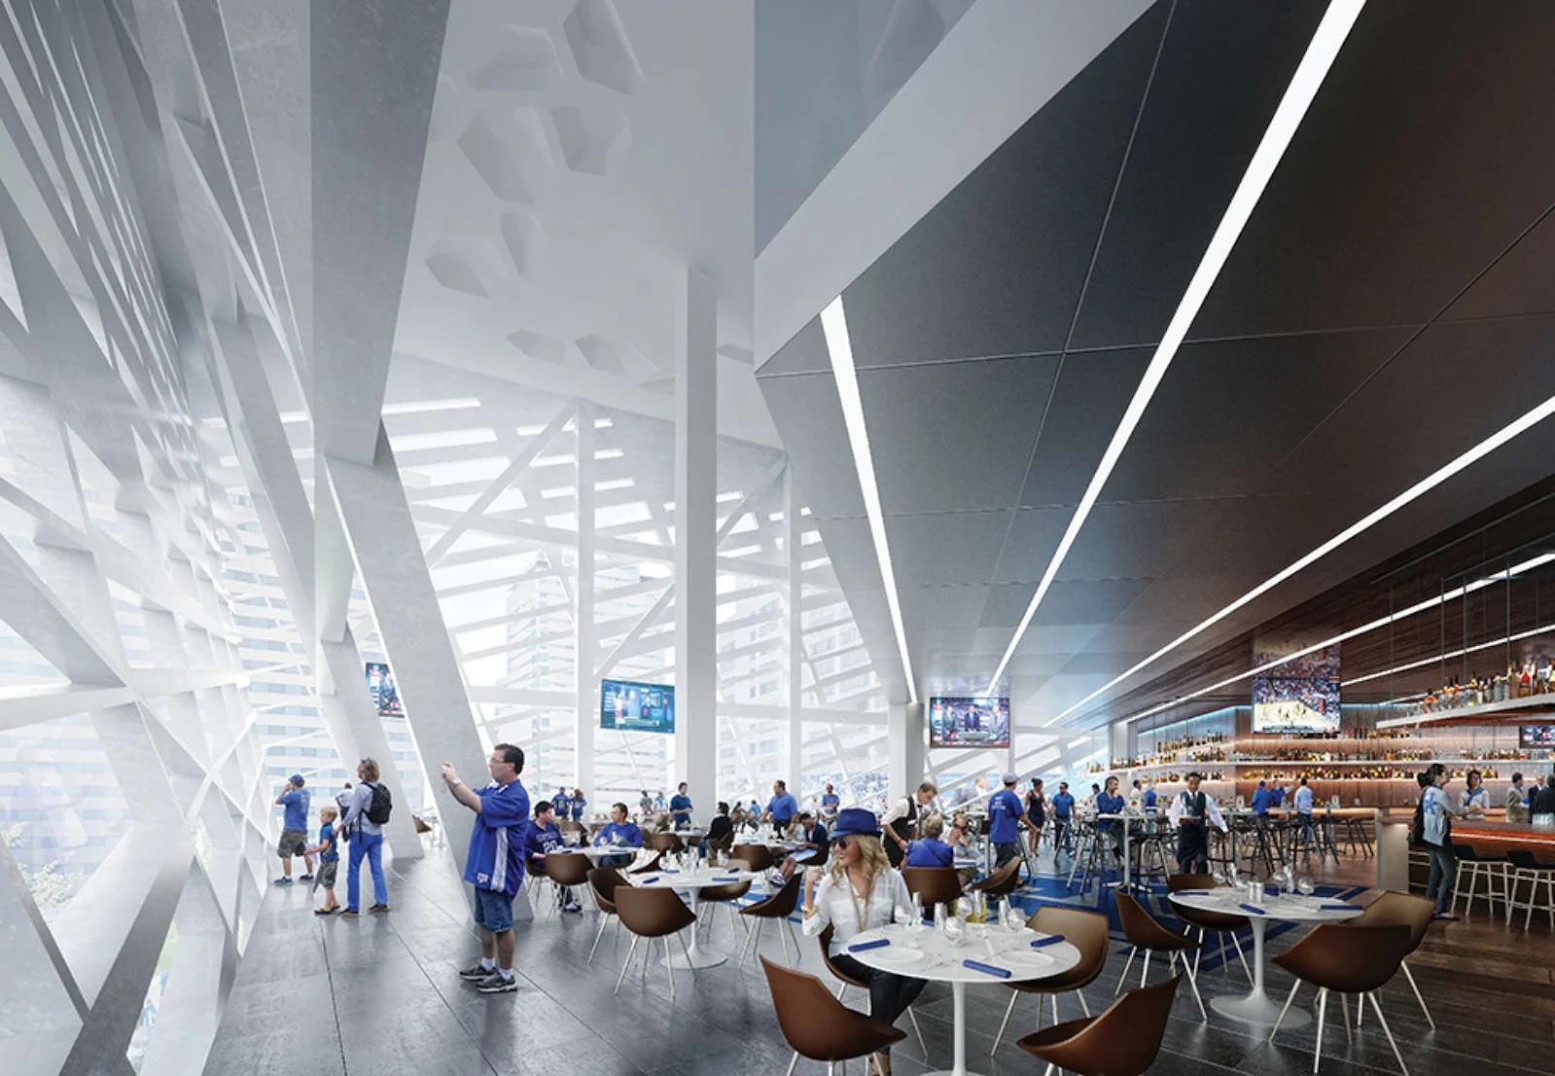 Rupp Arena Reinvention by NBBJ